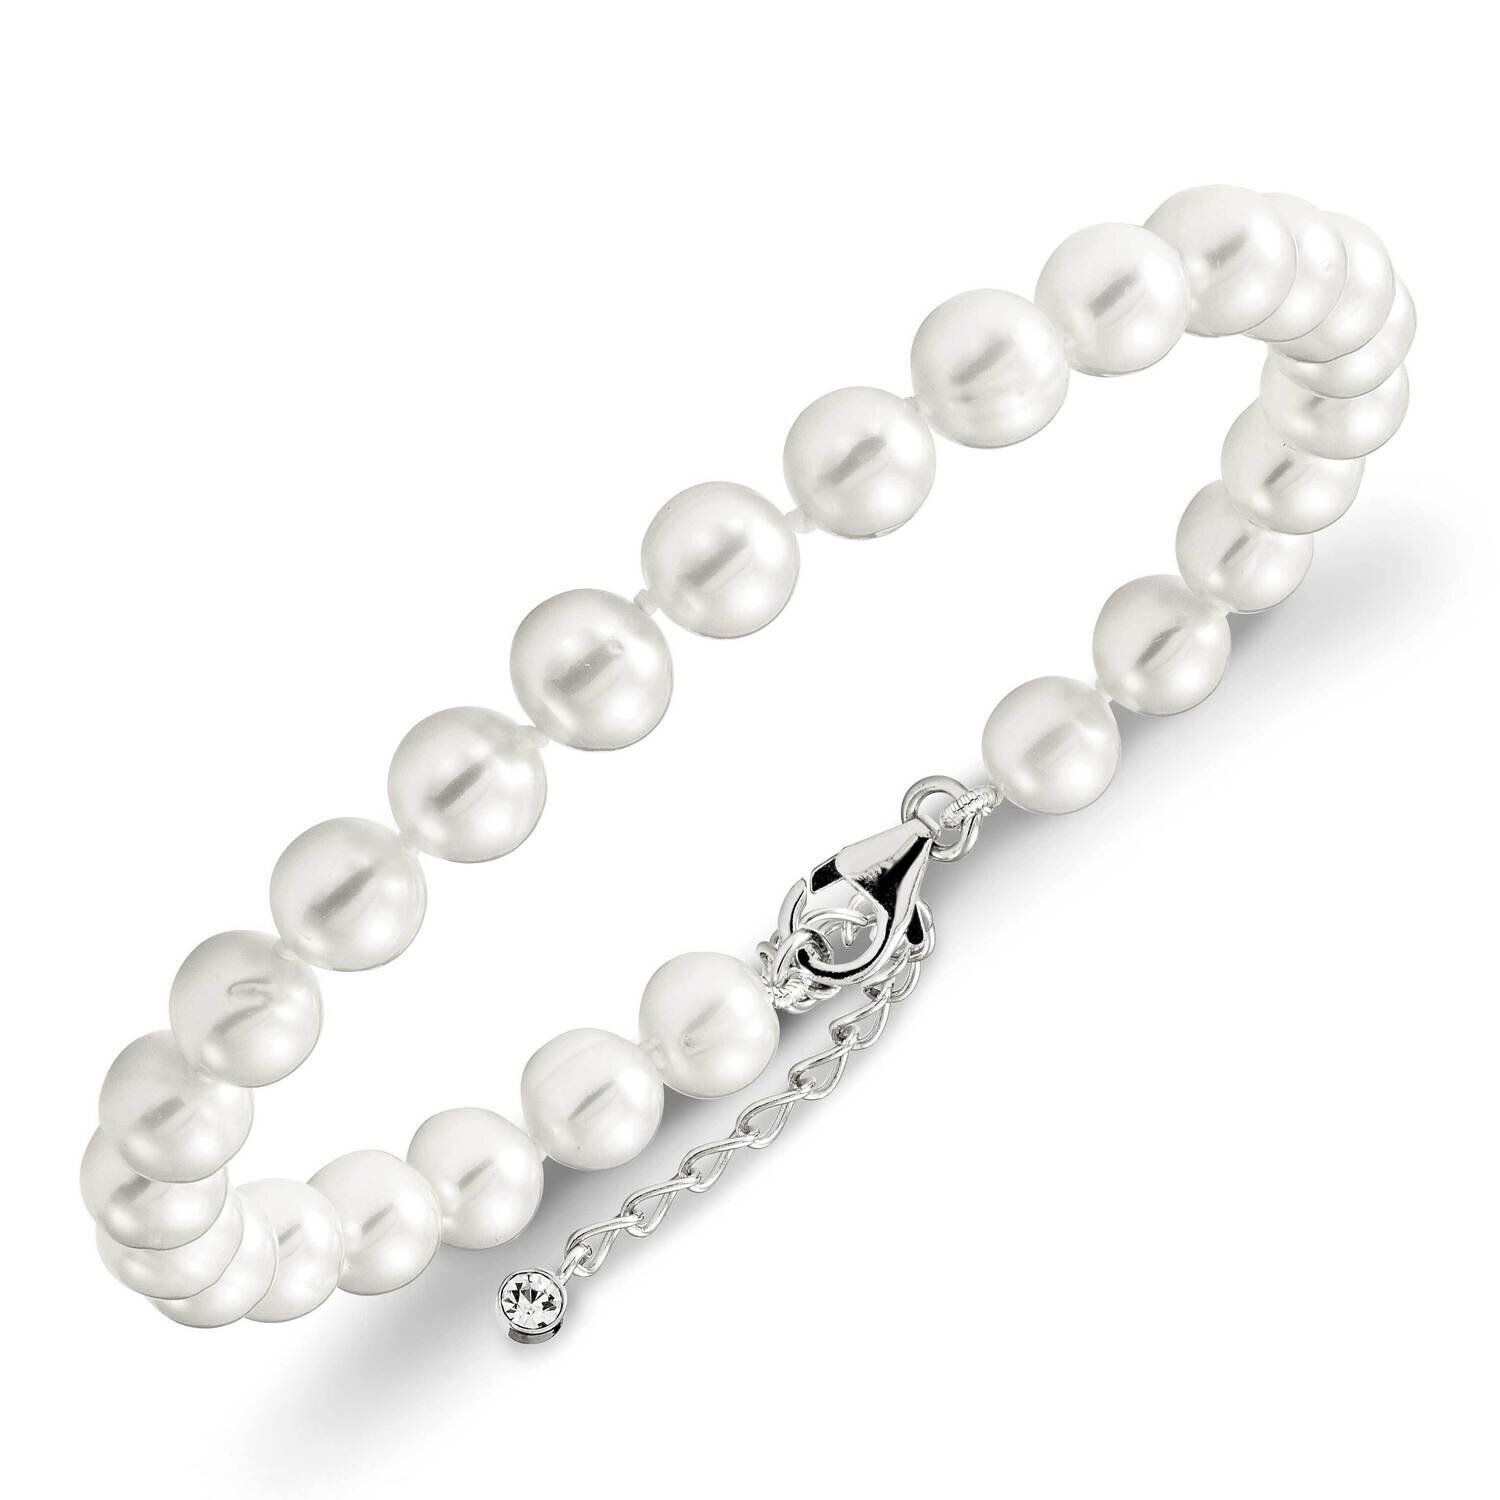 7-8mm Fwc Pearl & Cz with 2 Inch Extension Anklet Sterling Silver Rhodium-plated QH5448-8.5